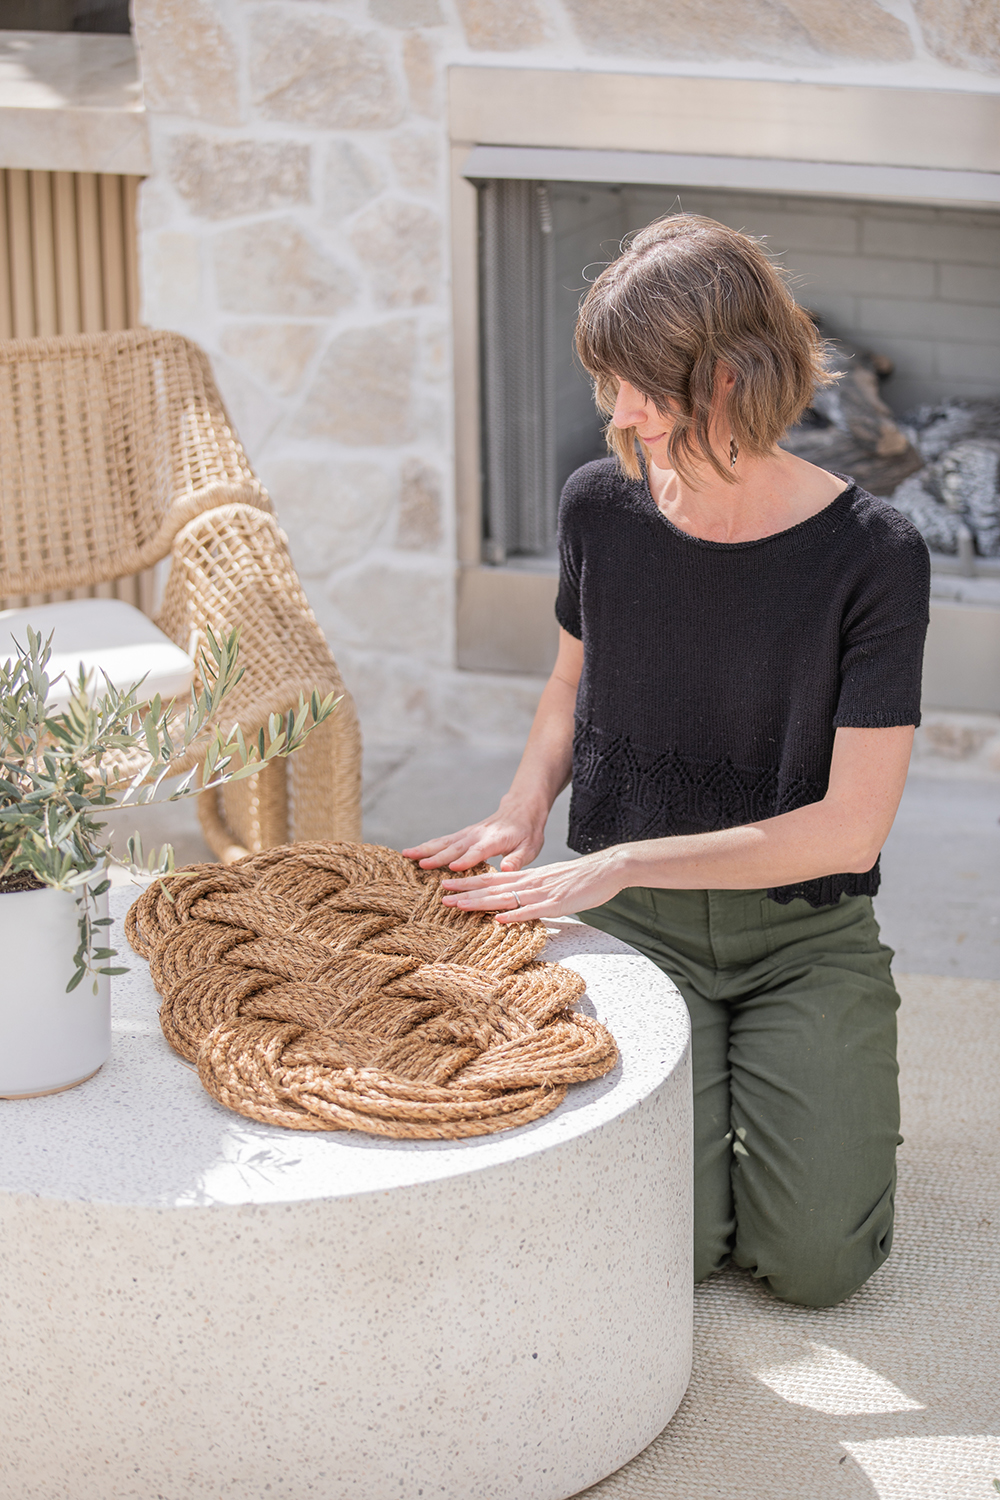 Handwoven Rope Rugs Workshop with Amanda Whited